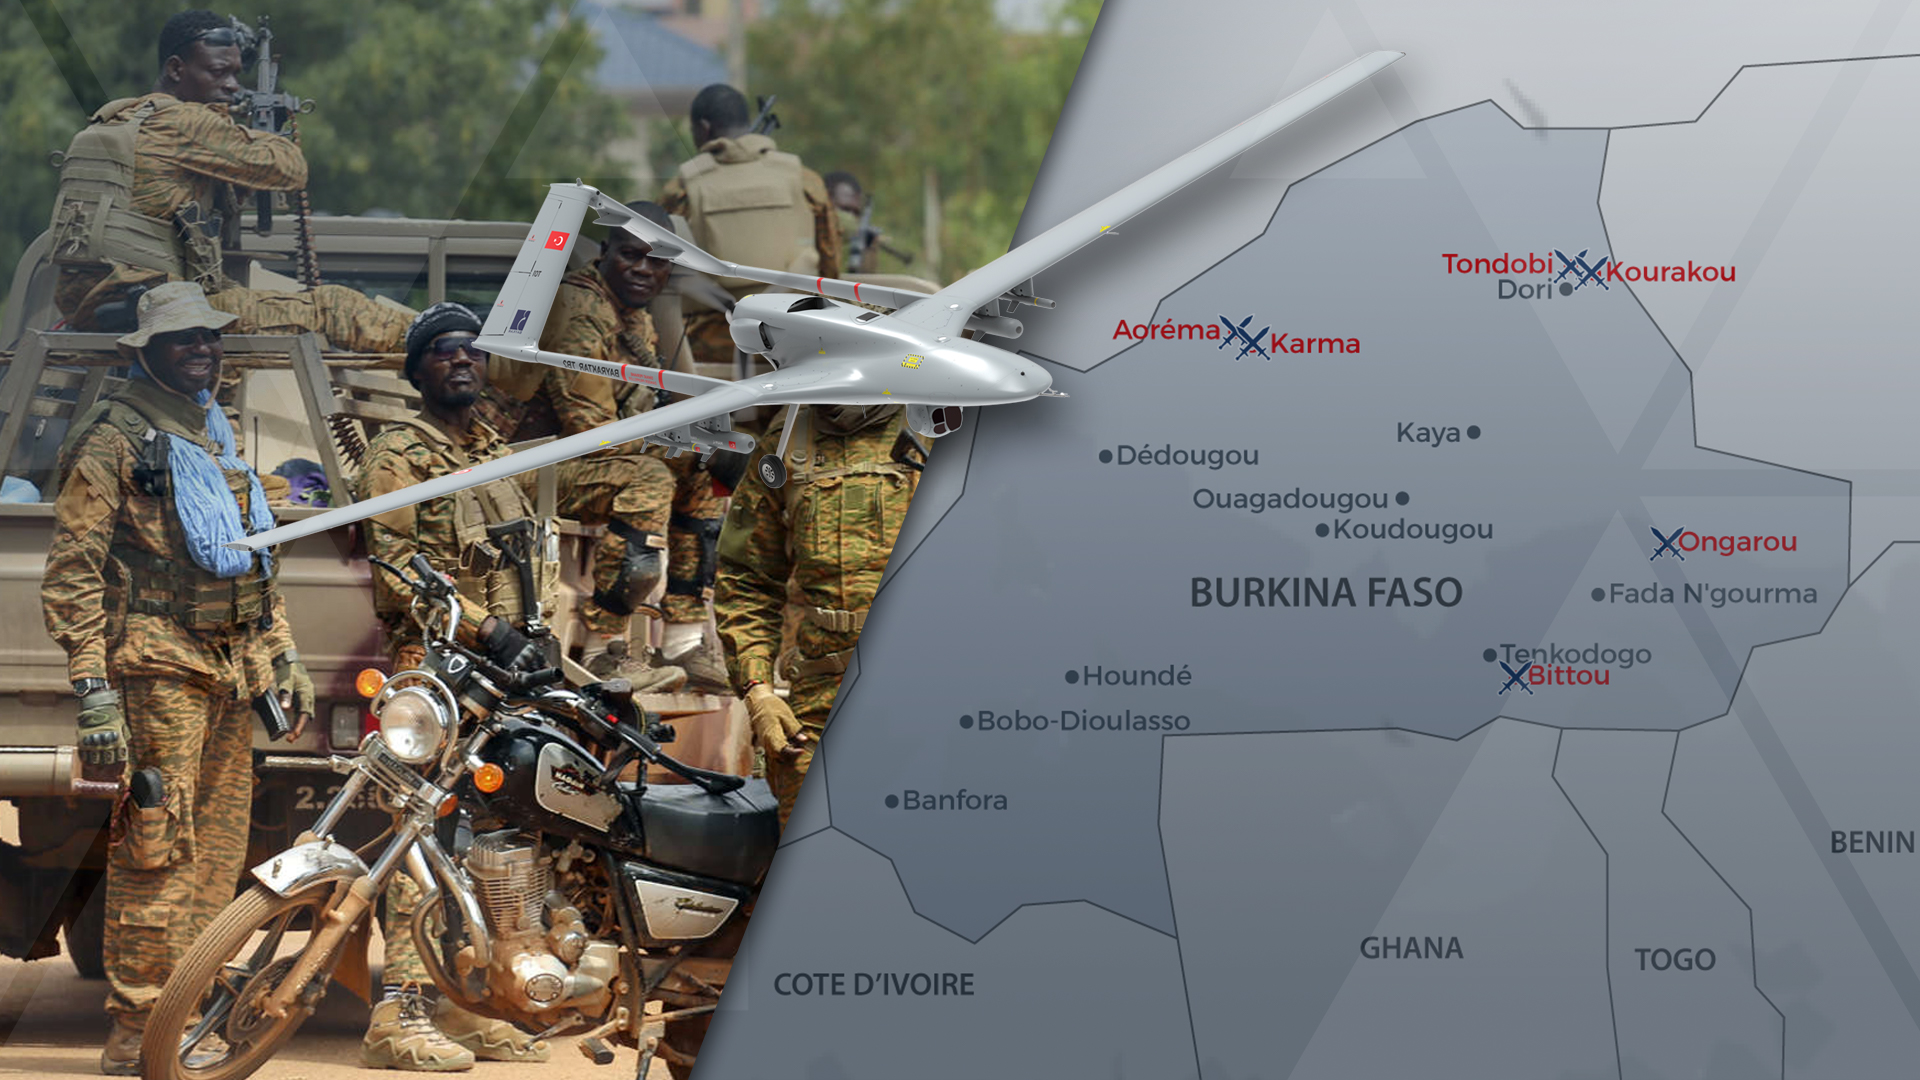 BURKINA FASO: COUNTERINSURGENCY SHIFTS TO OFFENSIVE TACTICS IN DEADLIEST MONTH ON RECORD